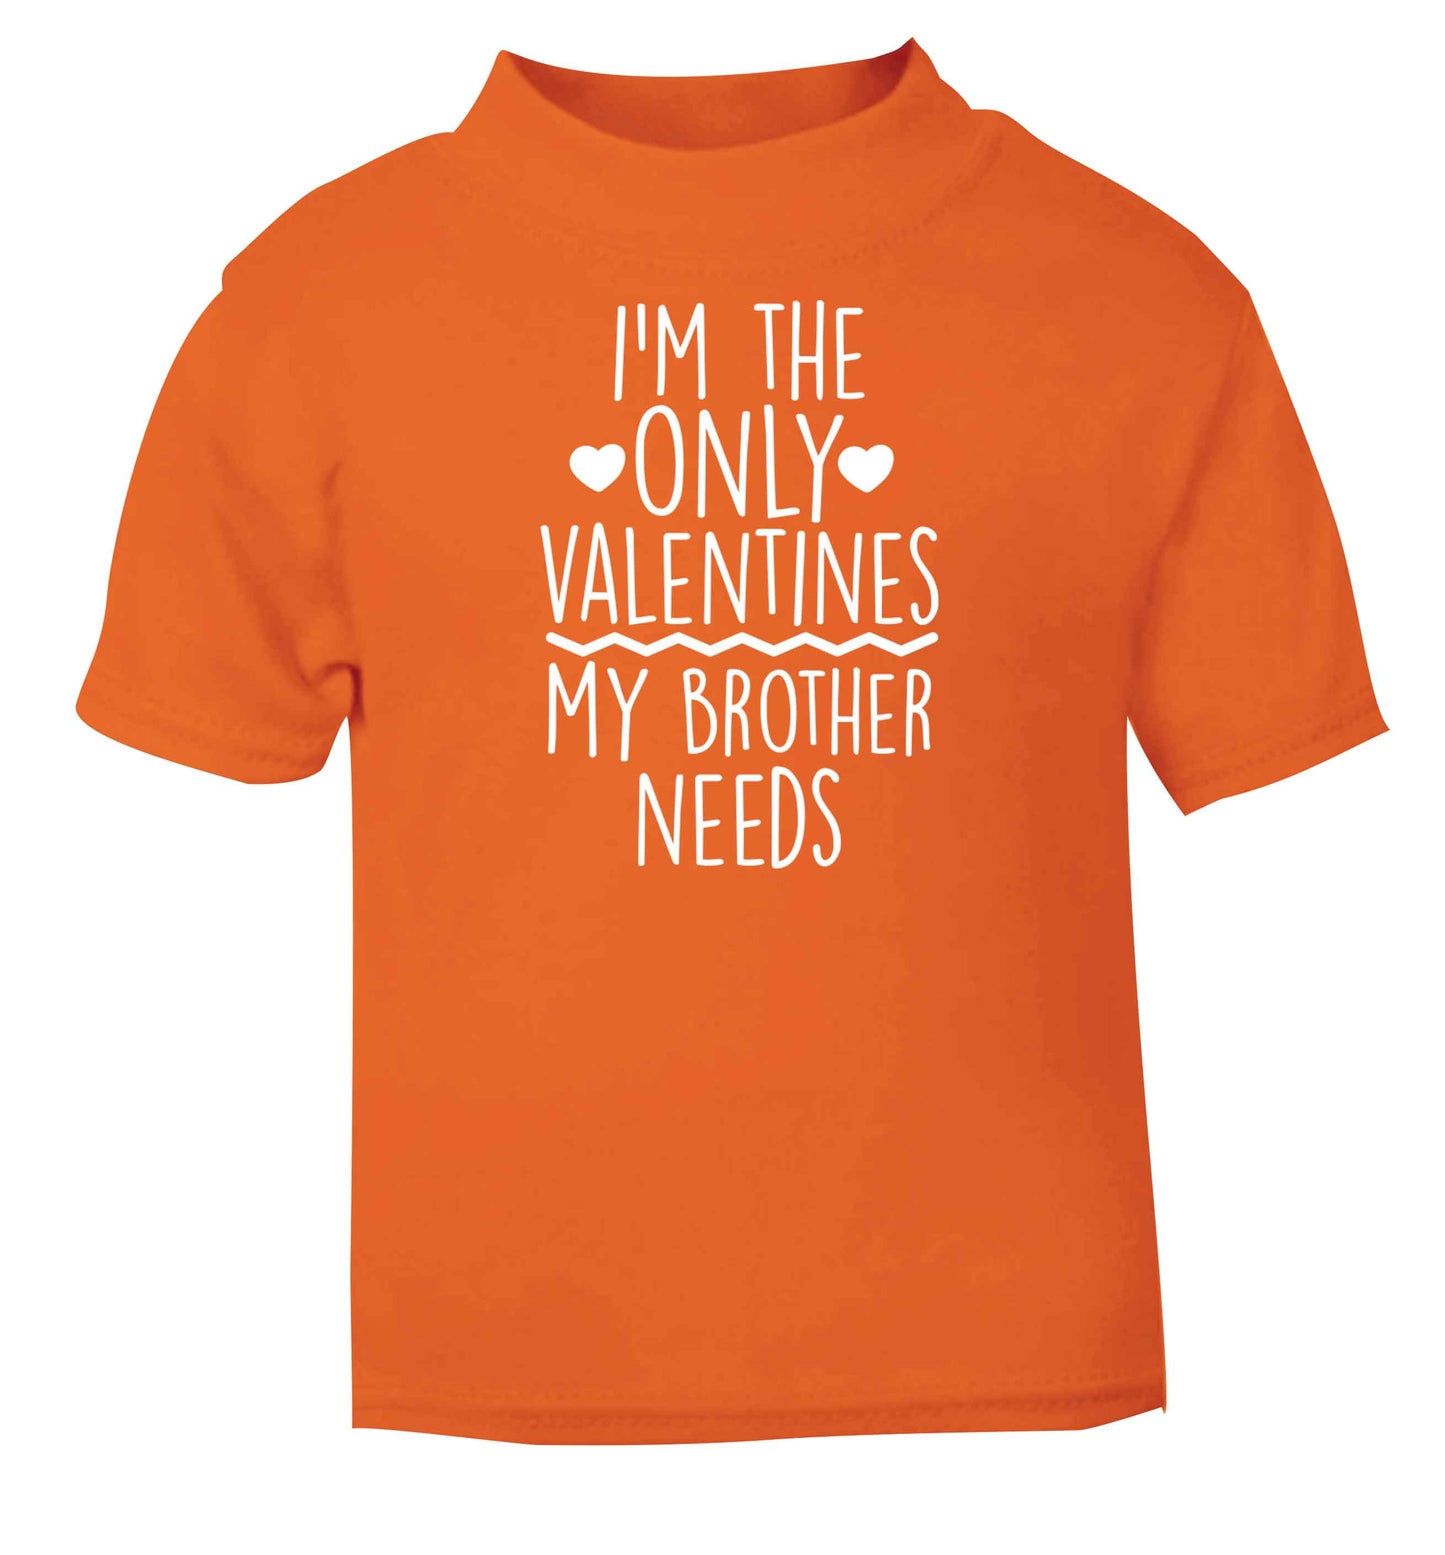 I'm the only valentines my brother needs orange baby toddler Tshirt 2 Years